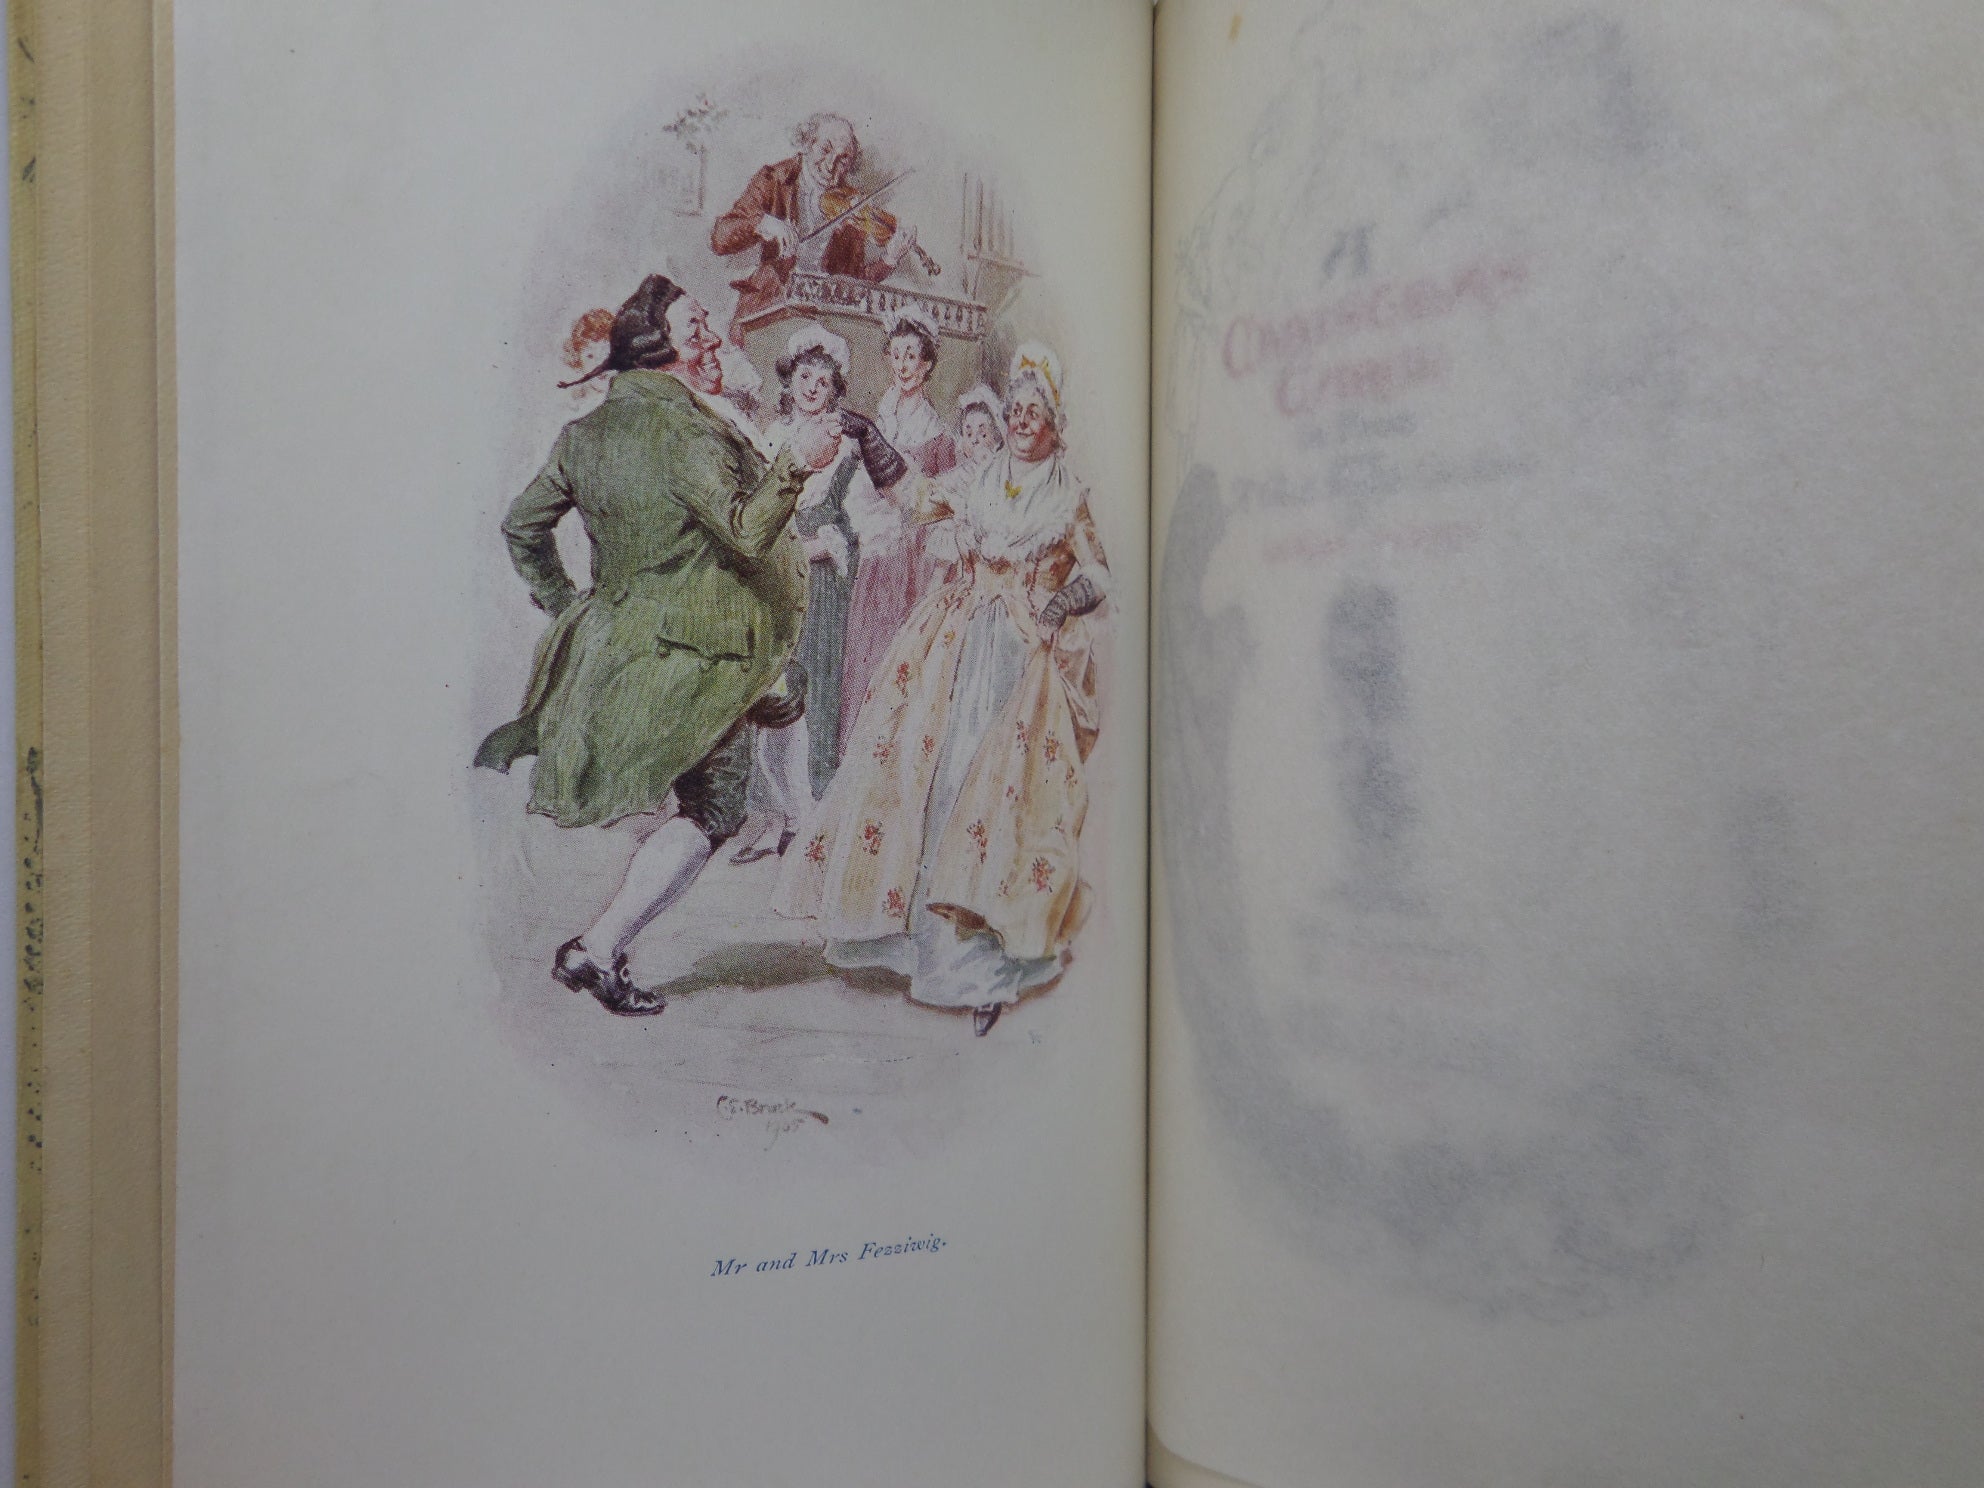 A CHRISTMAS CAROL BY CHARLES DICKENS 1905 ILLUSTRATED BY C.E. BROCK